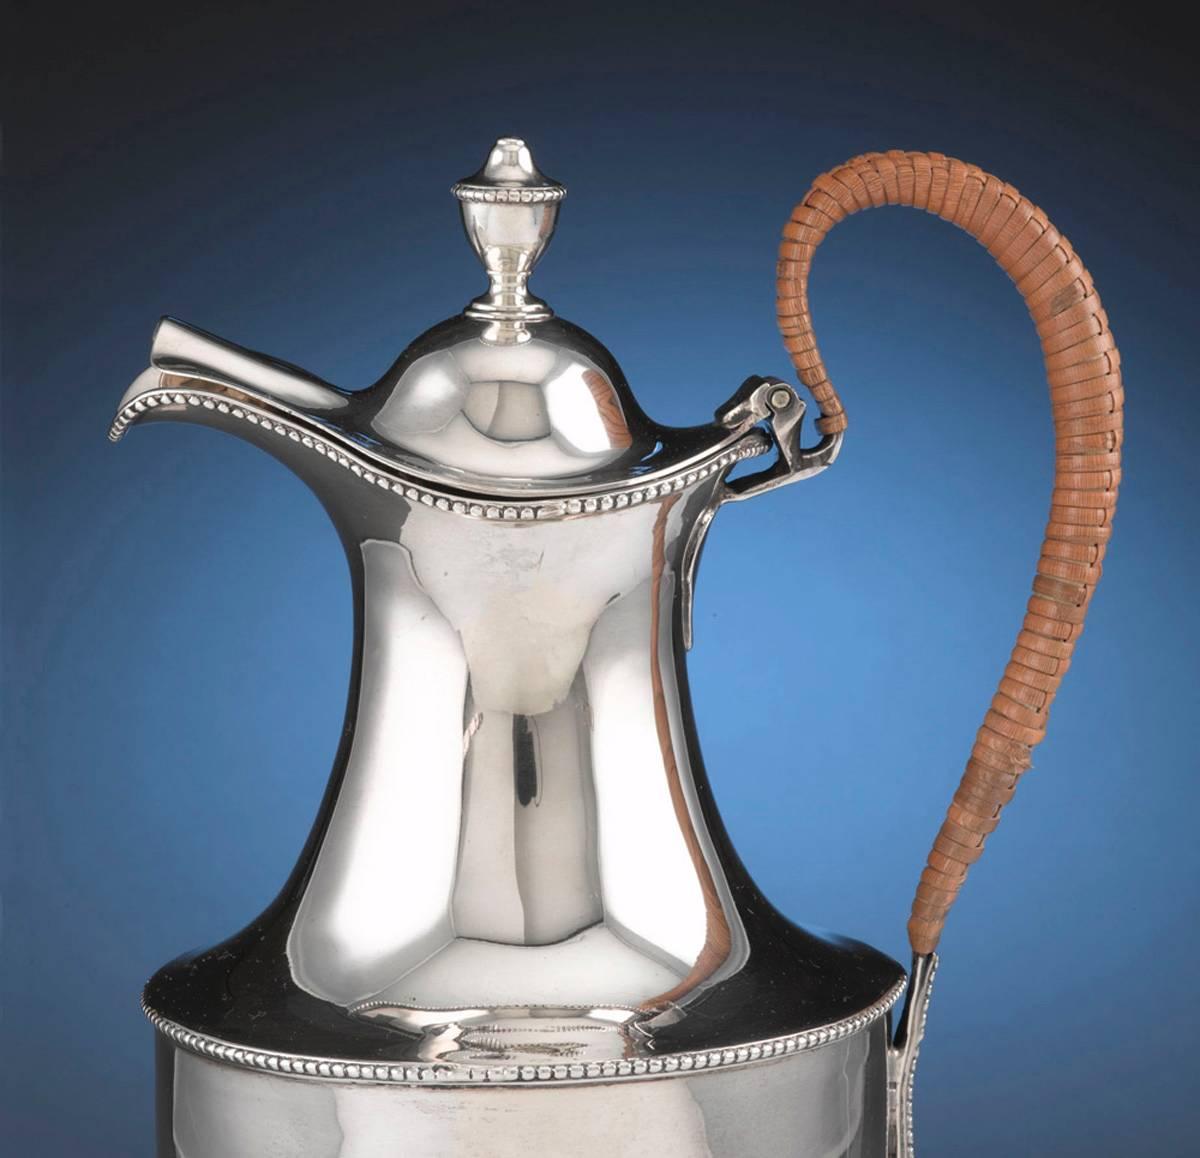 Elegant sterling silver jug by famous silversmith Hester Bateman. Simplicity and elegance of form are complimented by the slightest detail of beaded edges. Insulated wicker wrapped handle prevents heat transfer and adds an organic contrast to the